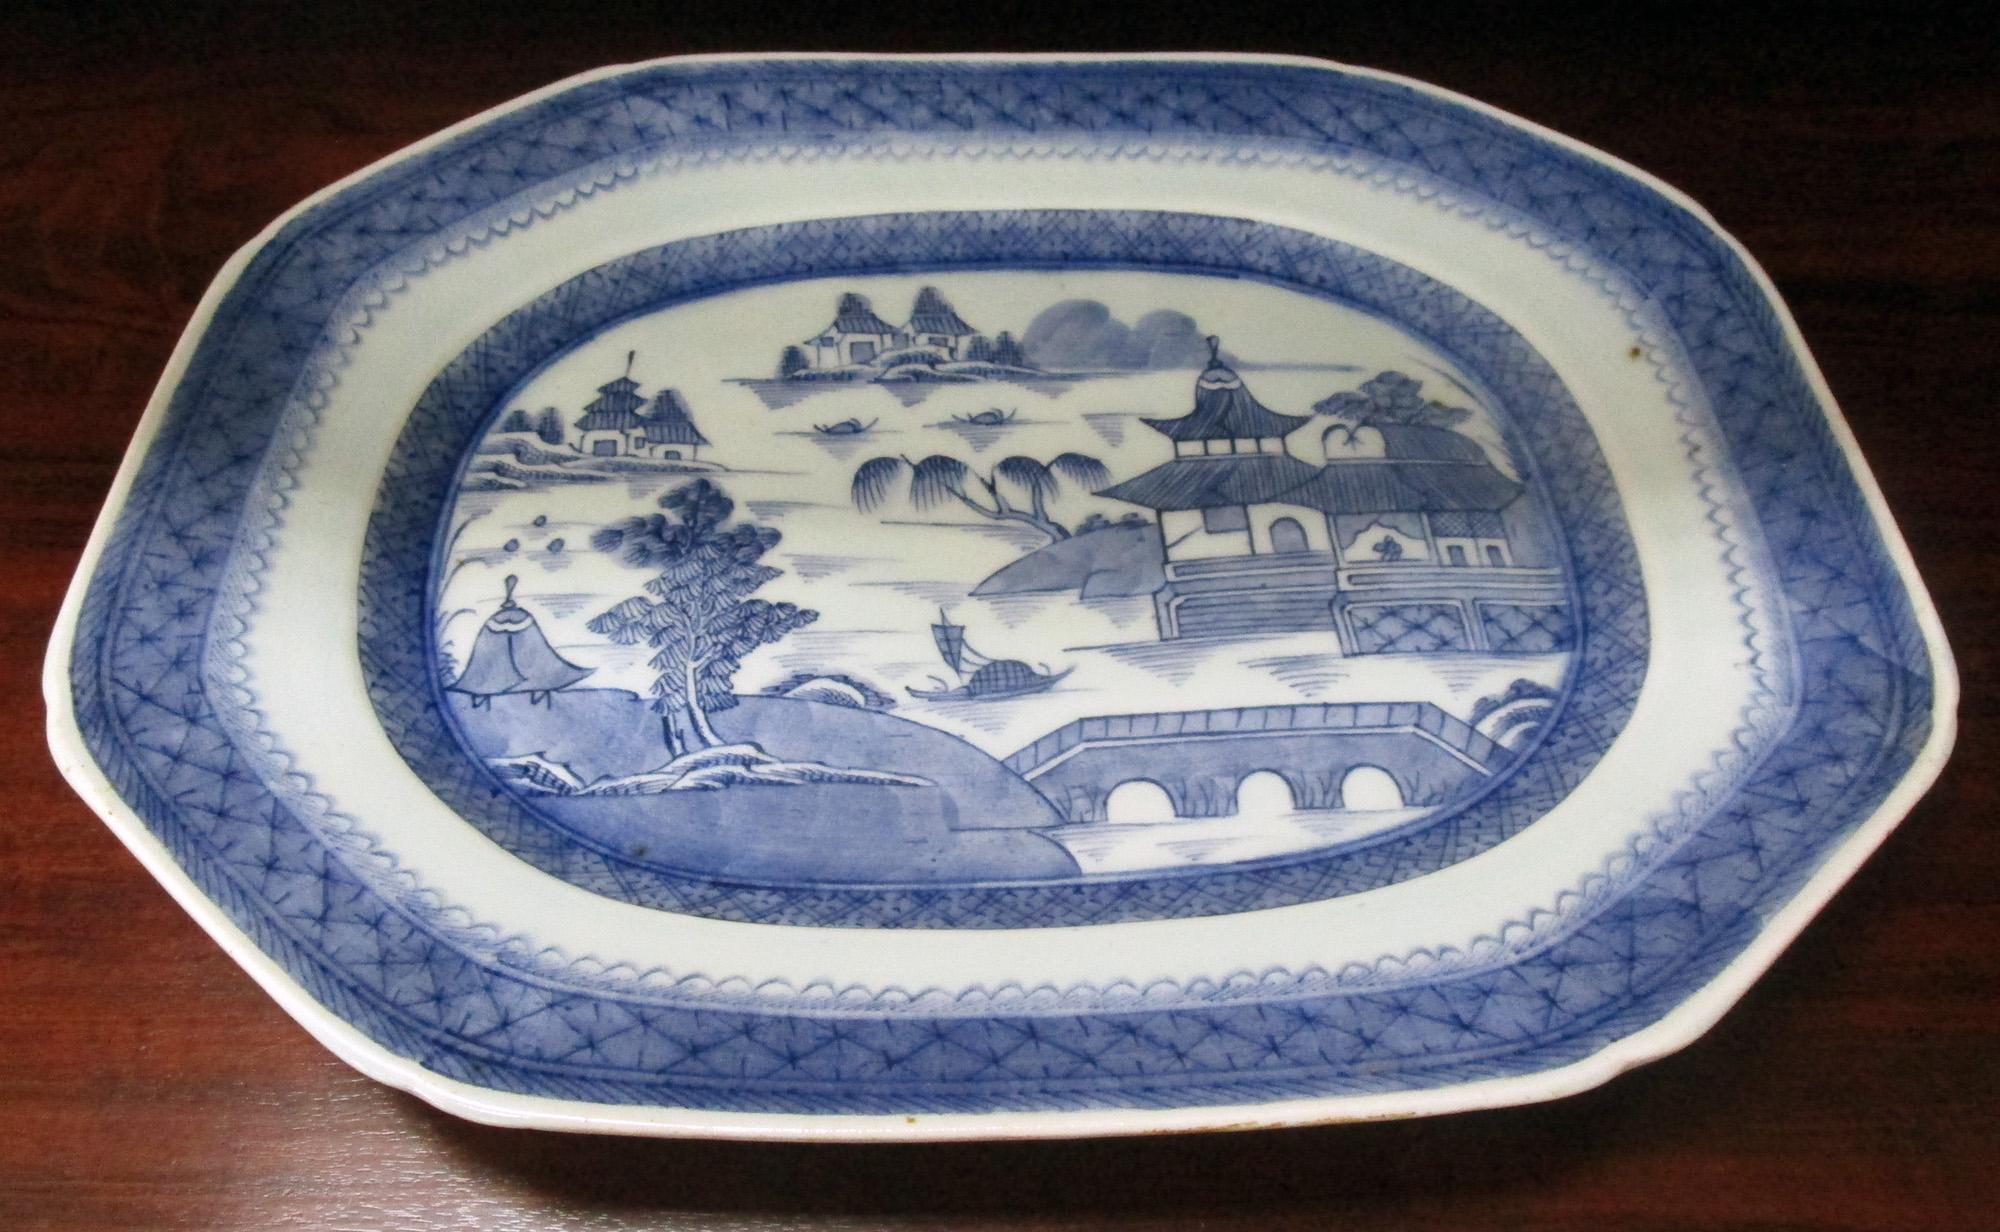 Porcelain 19th Century Chinese Export Blue and White Canton Ware Platter